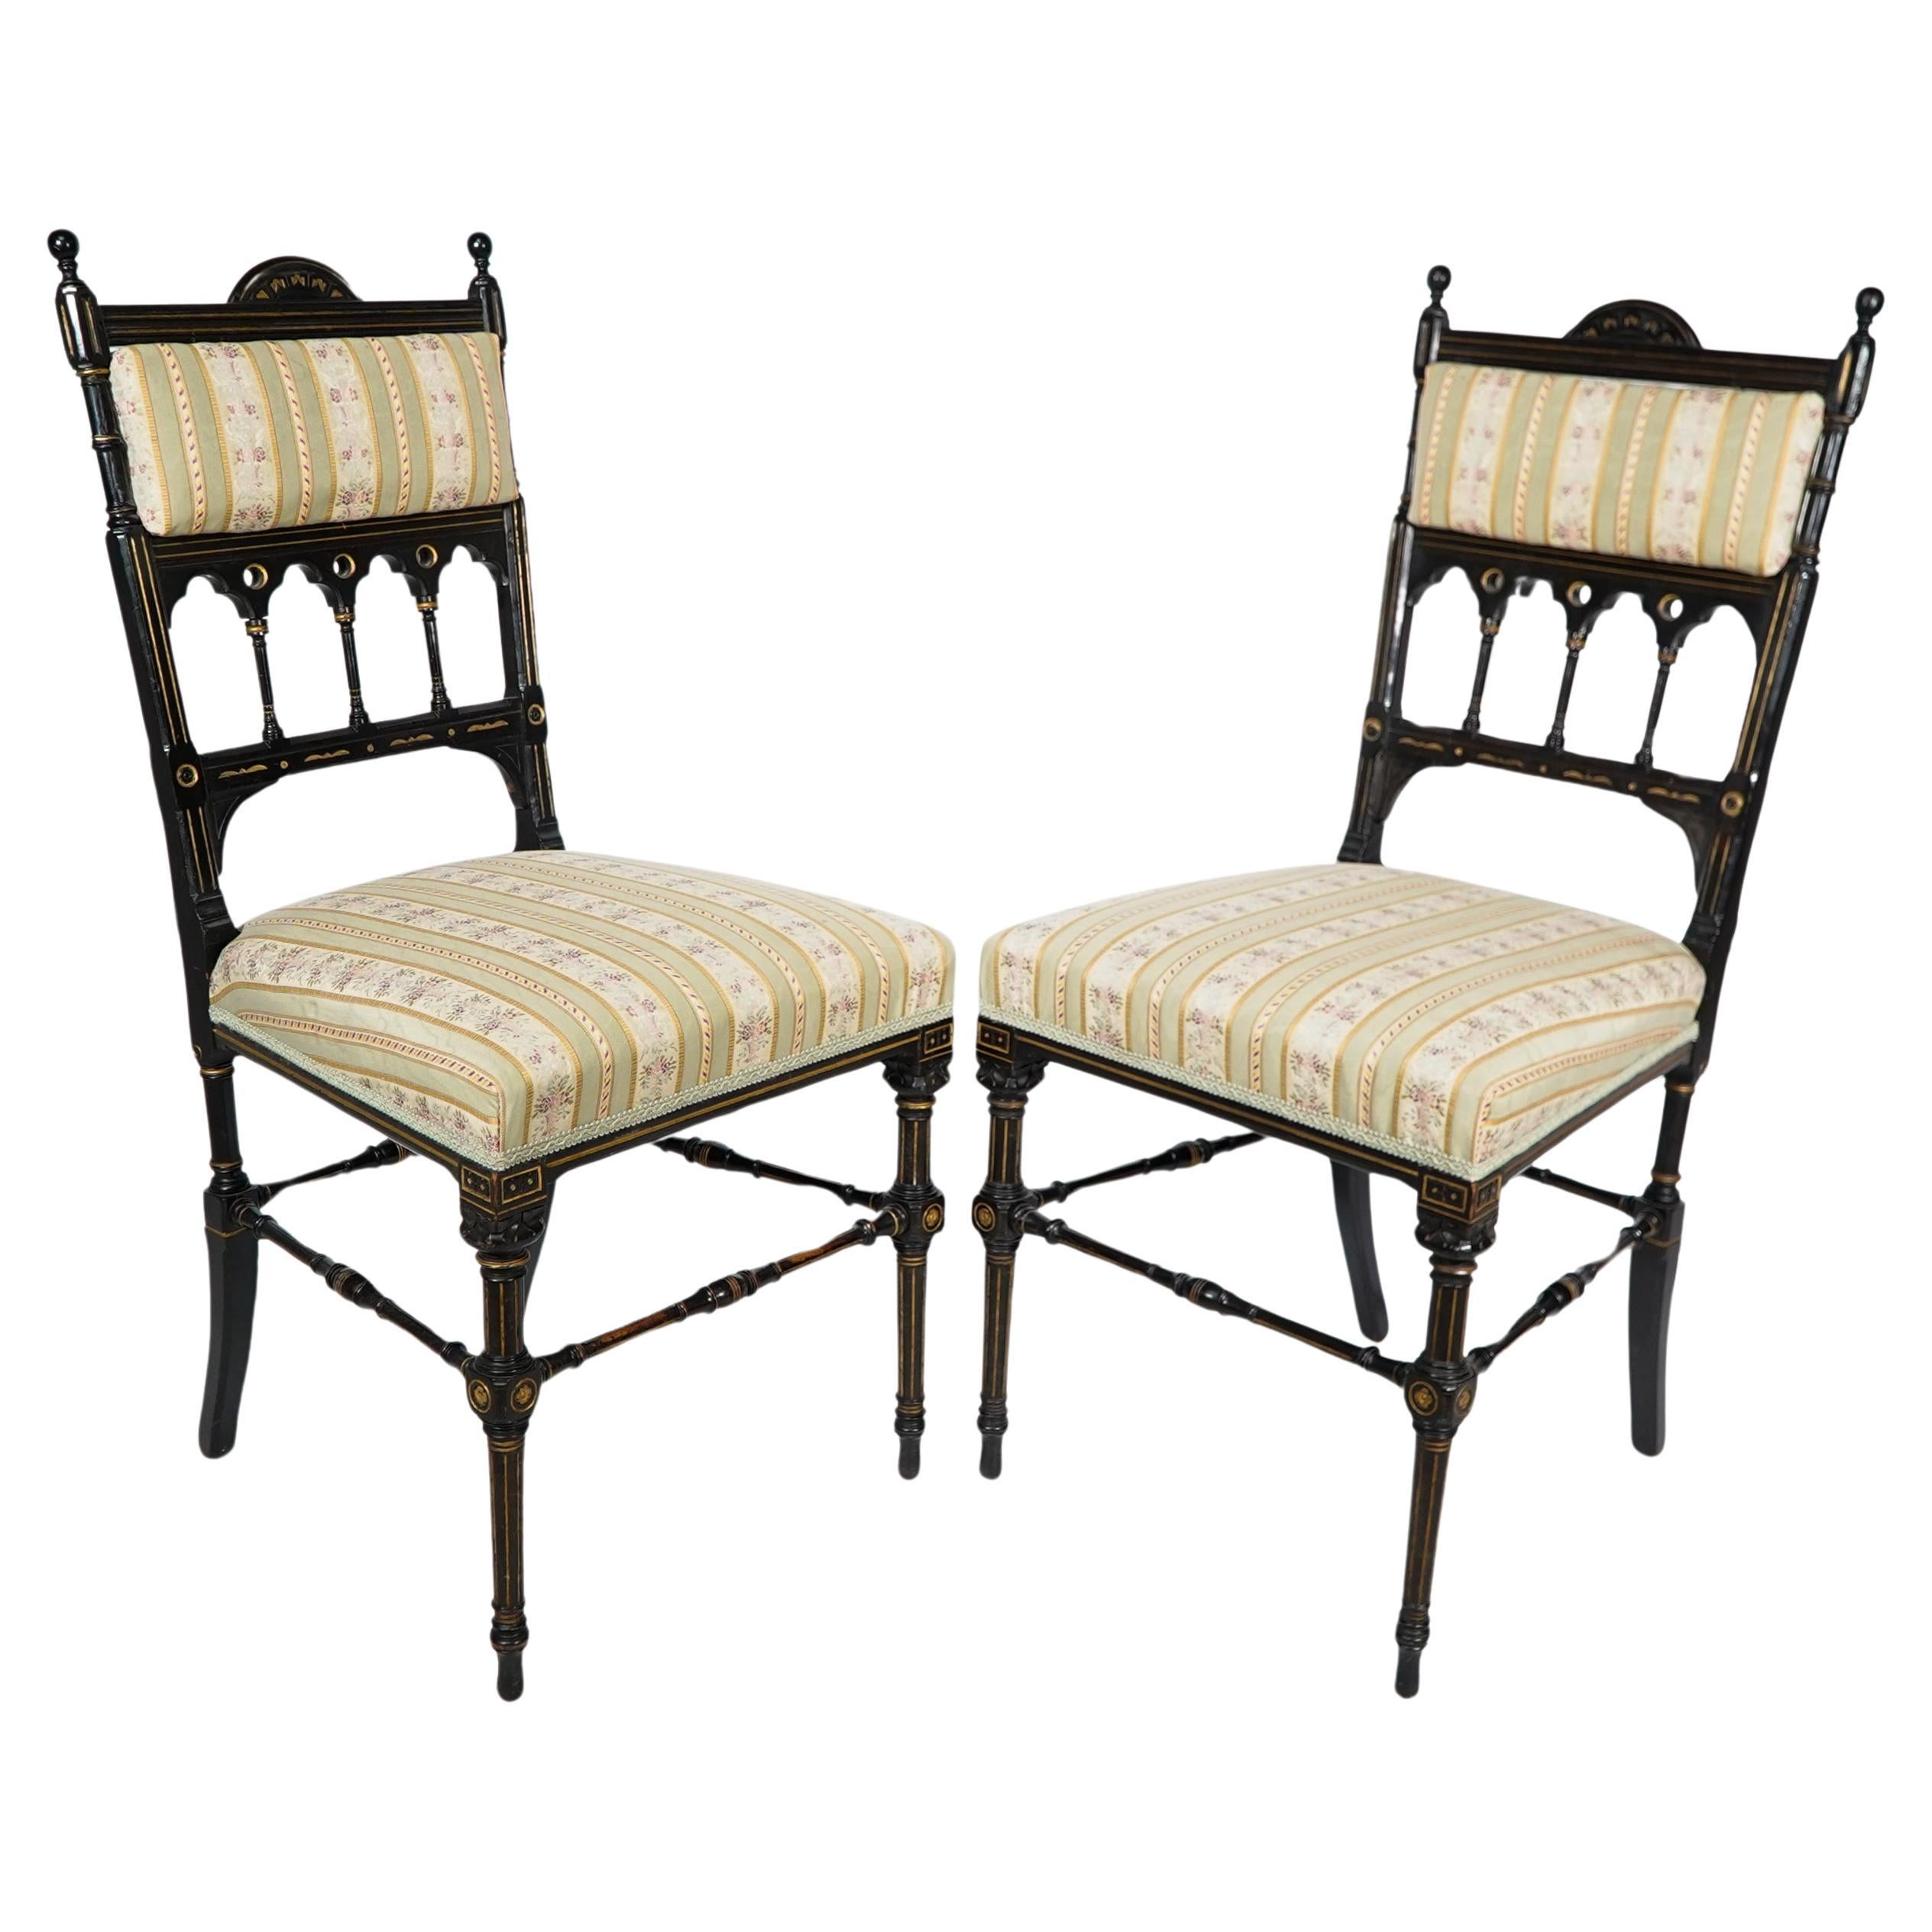 Whytock & Reid. A pair of Aesthetic Movement ebonized & parcel gilt side chairs.